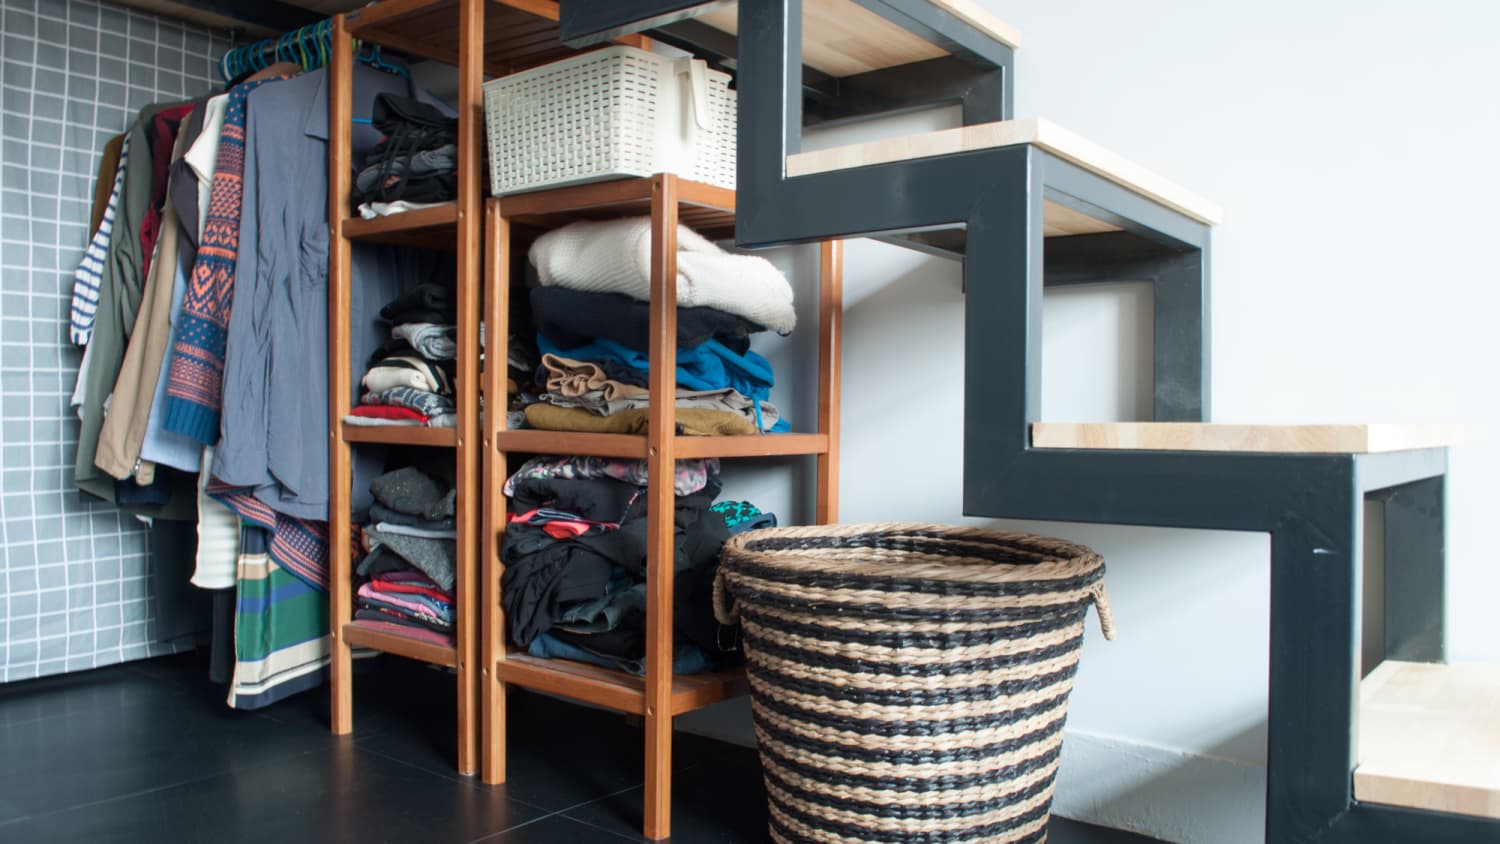 Under stairs storage ideas that use an awkward space effectively